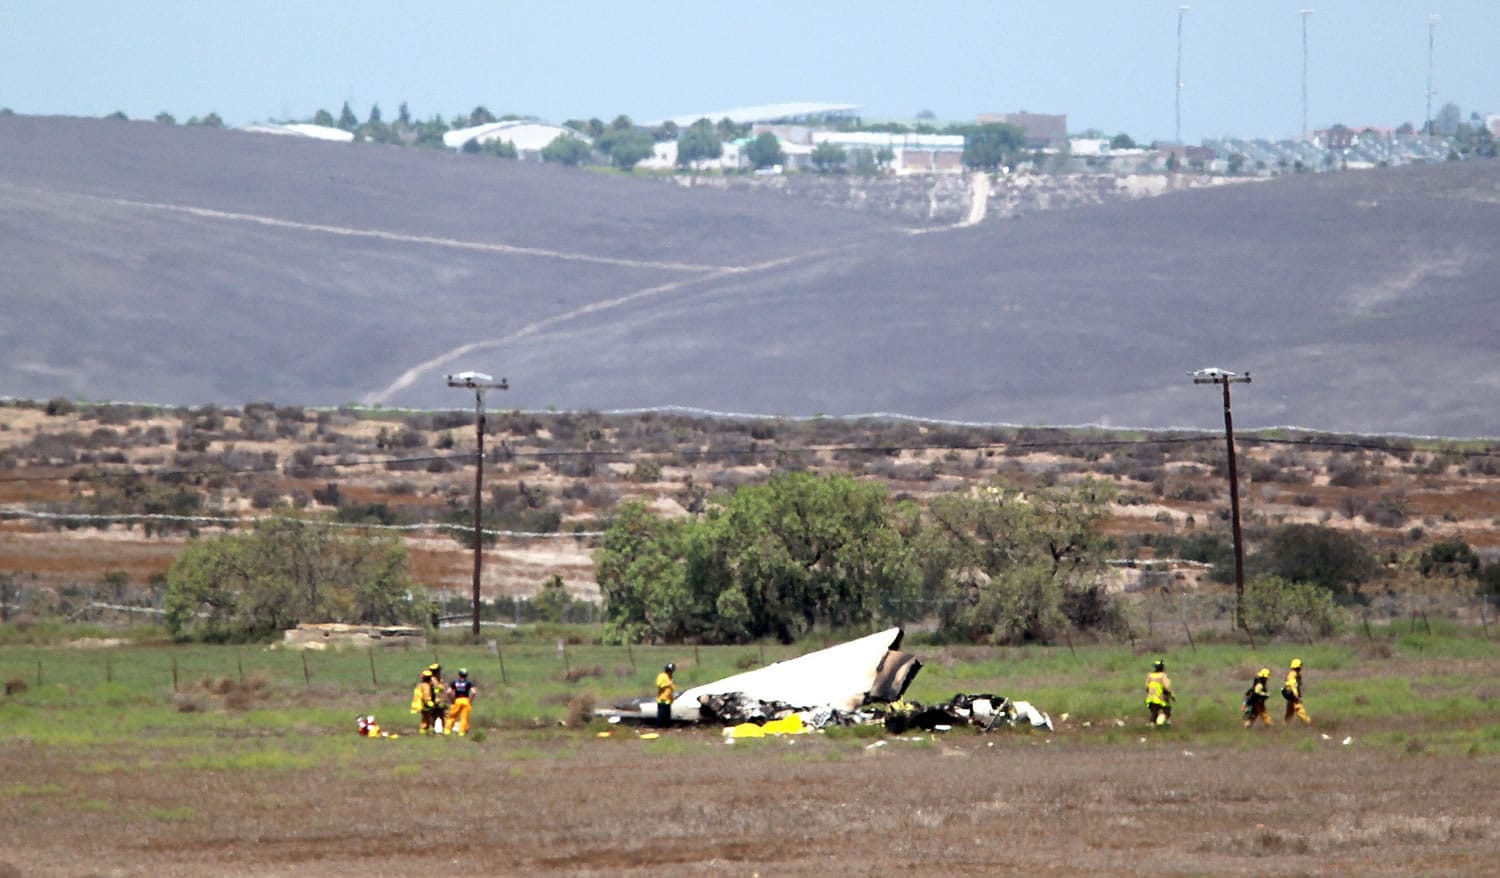 Authorities say four people died Sunday following the mid-air collision of two small planes near an airport in southern San Diego County.